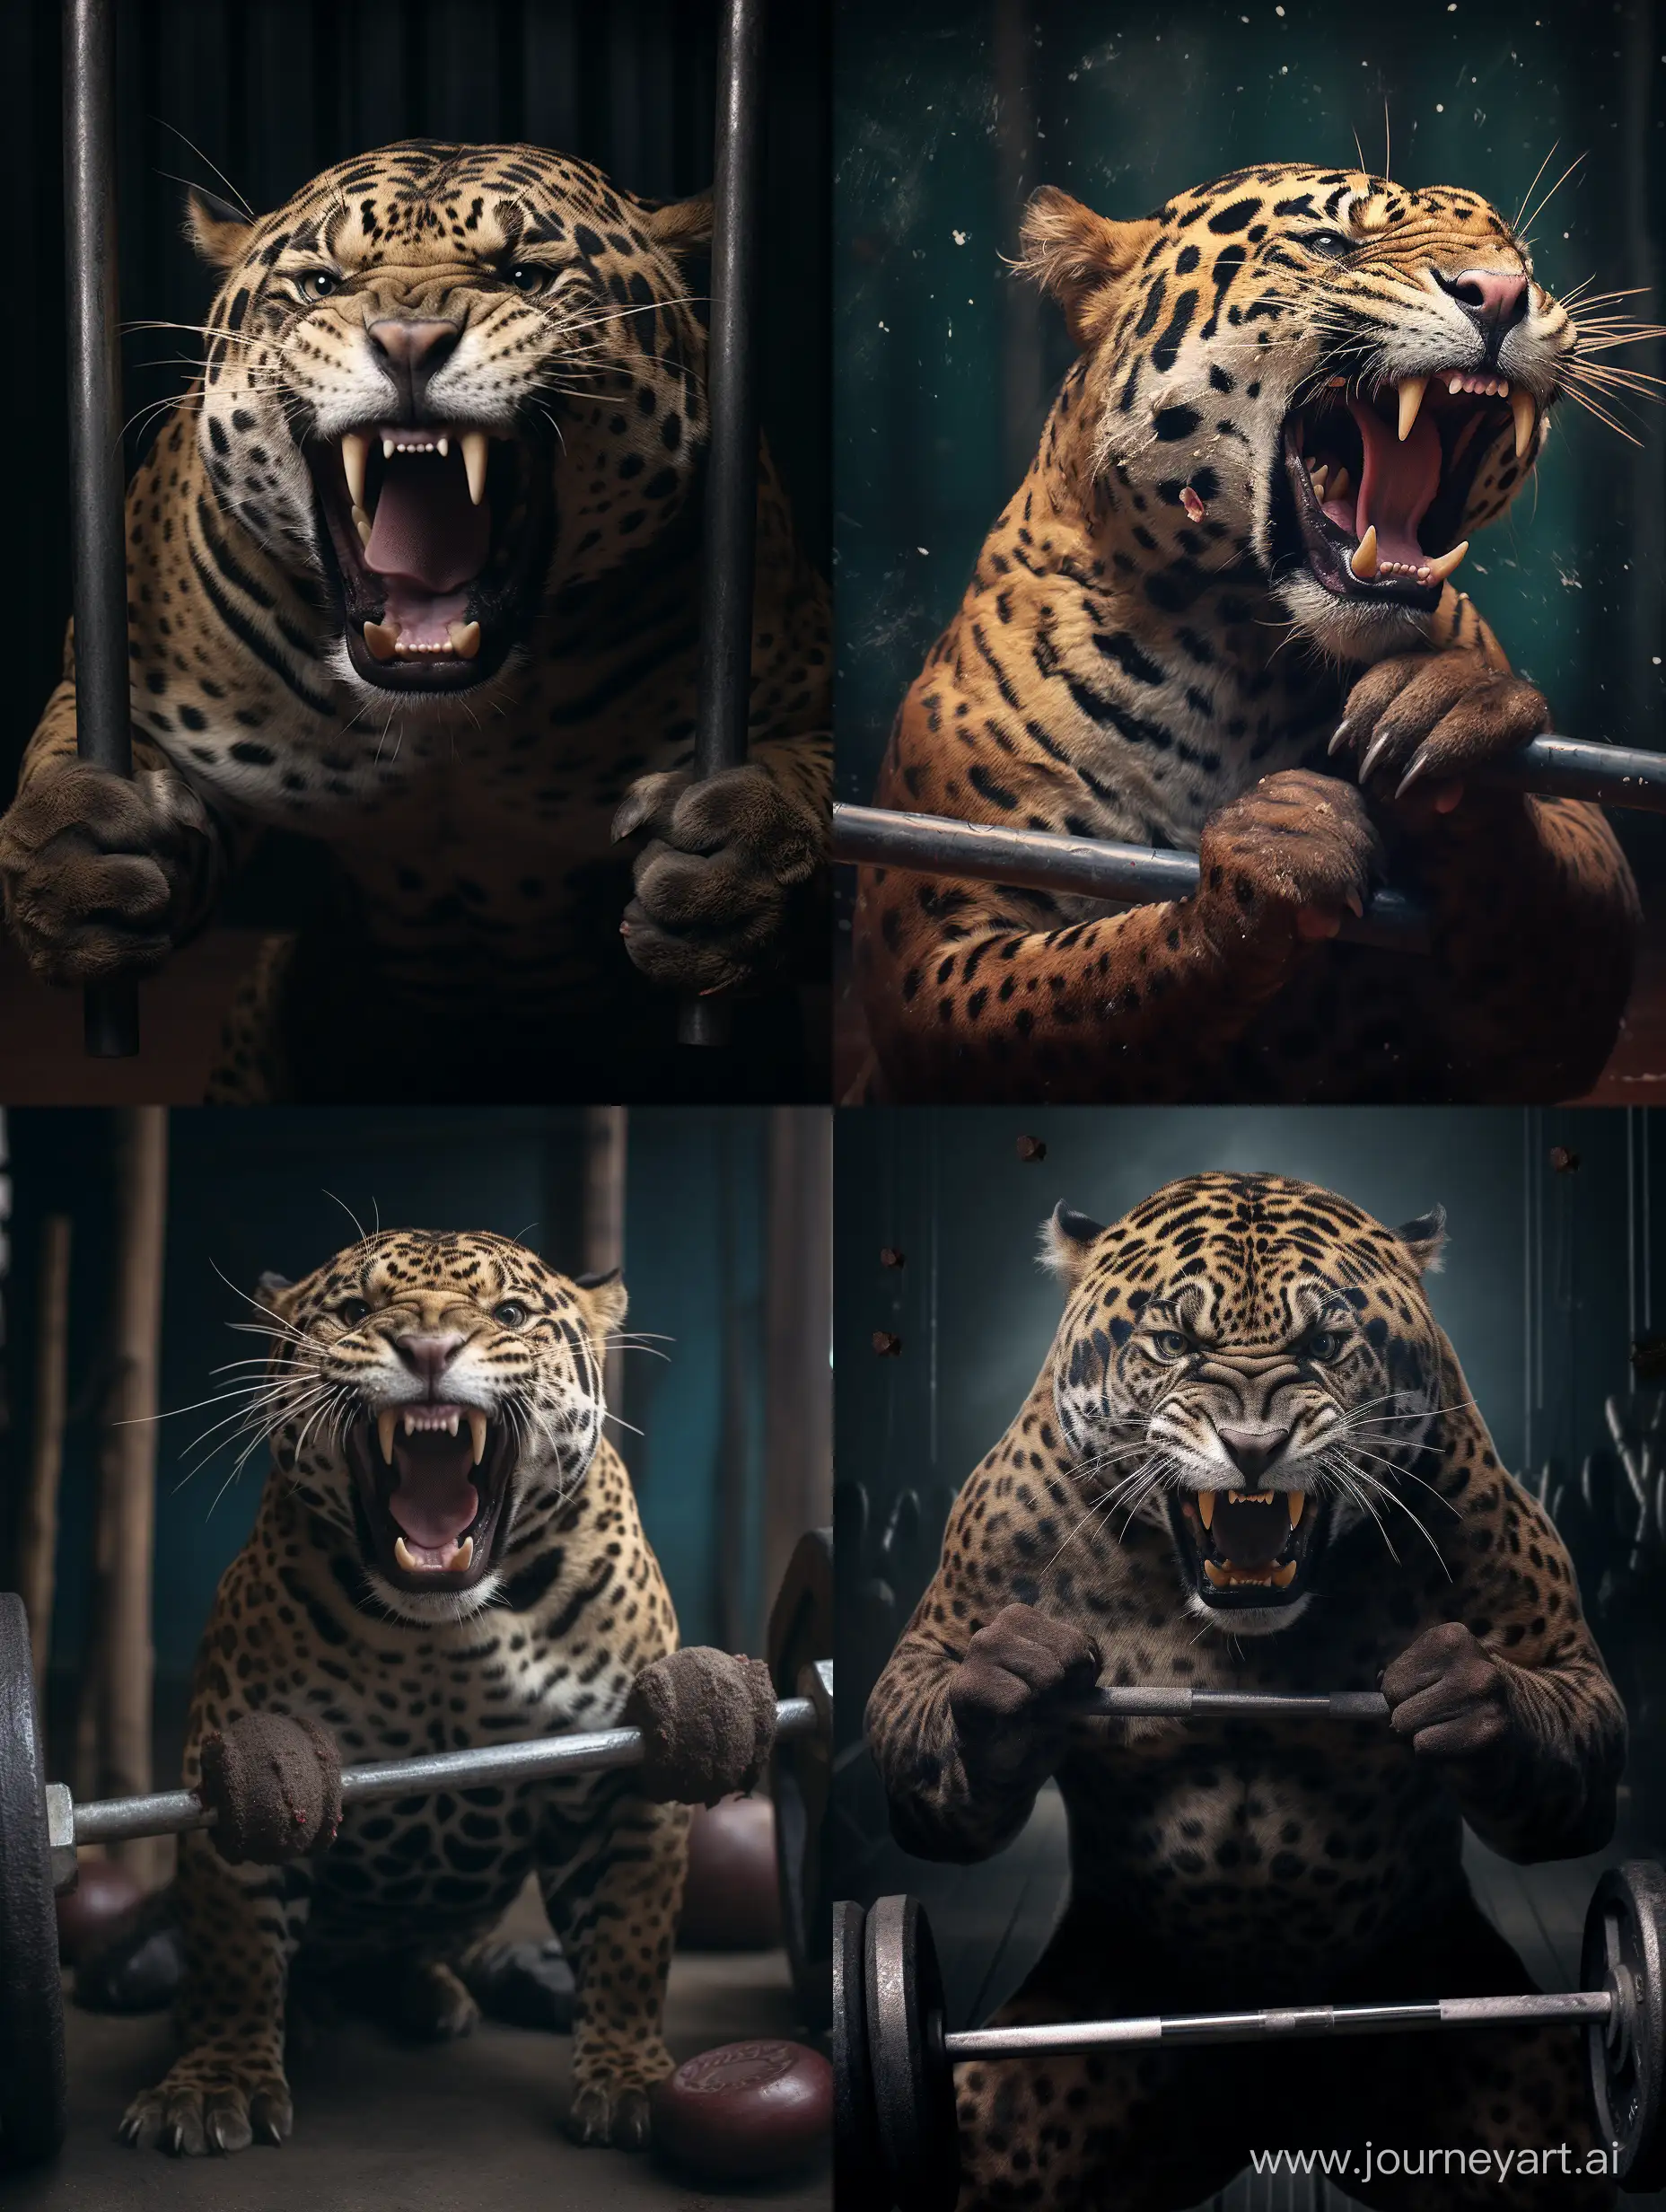 jaguar bitting a crossfit barbell with weights
